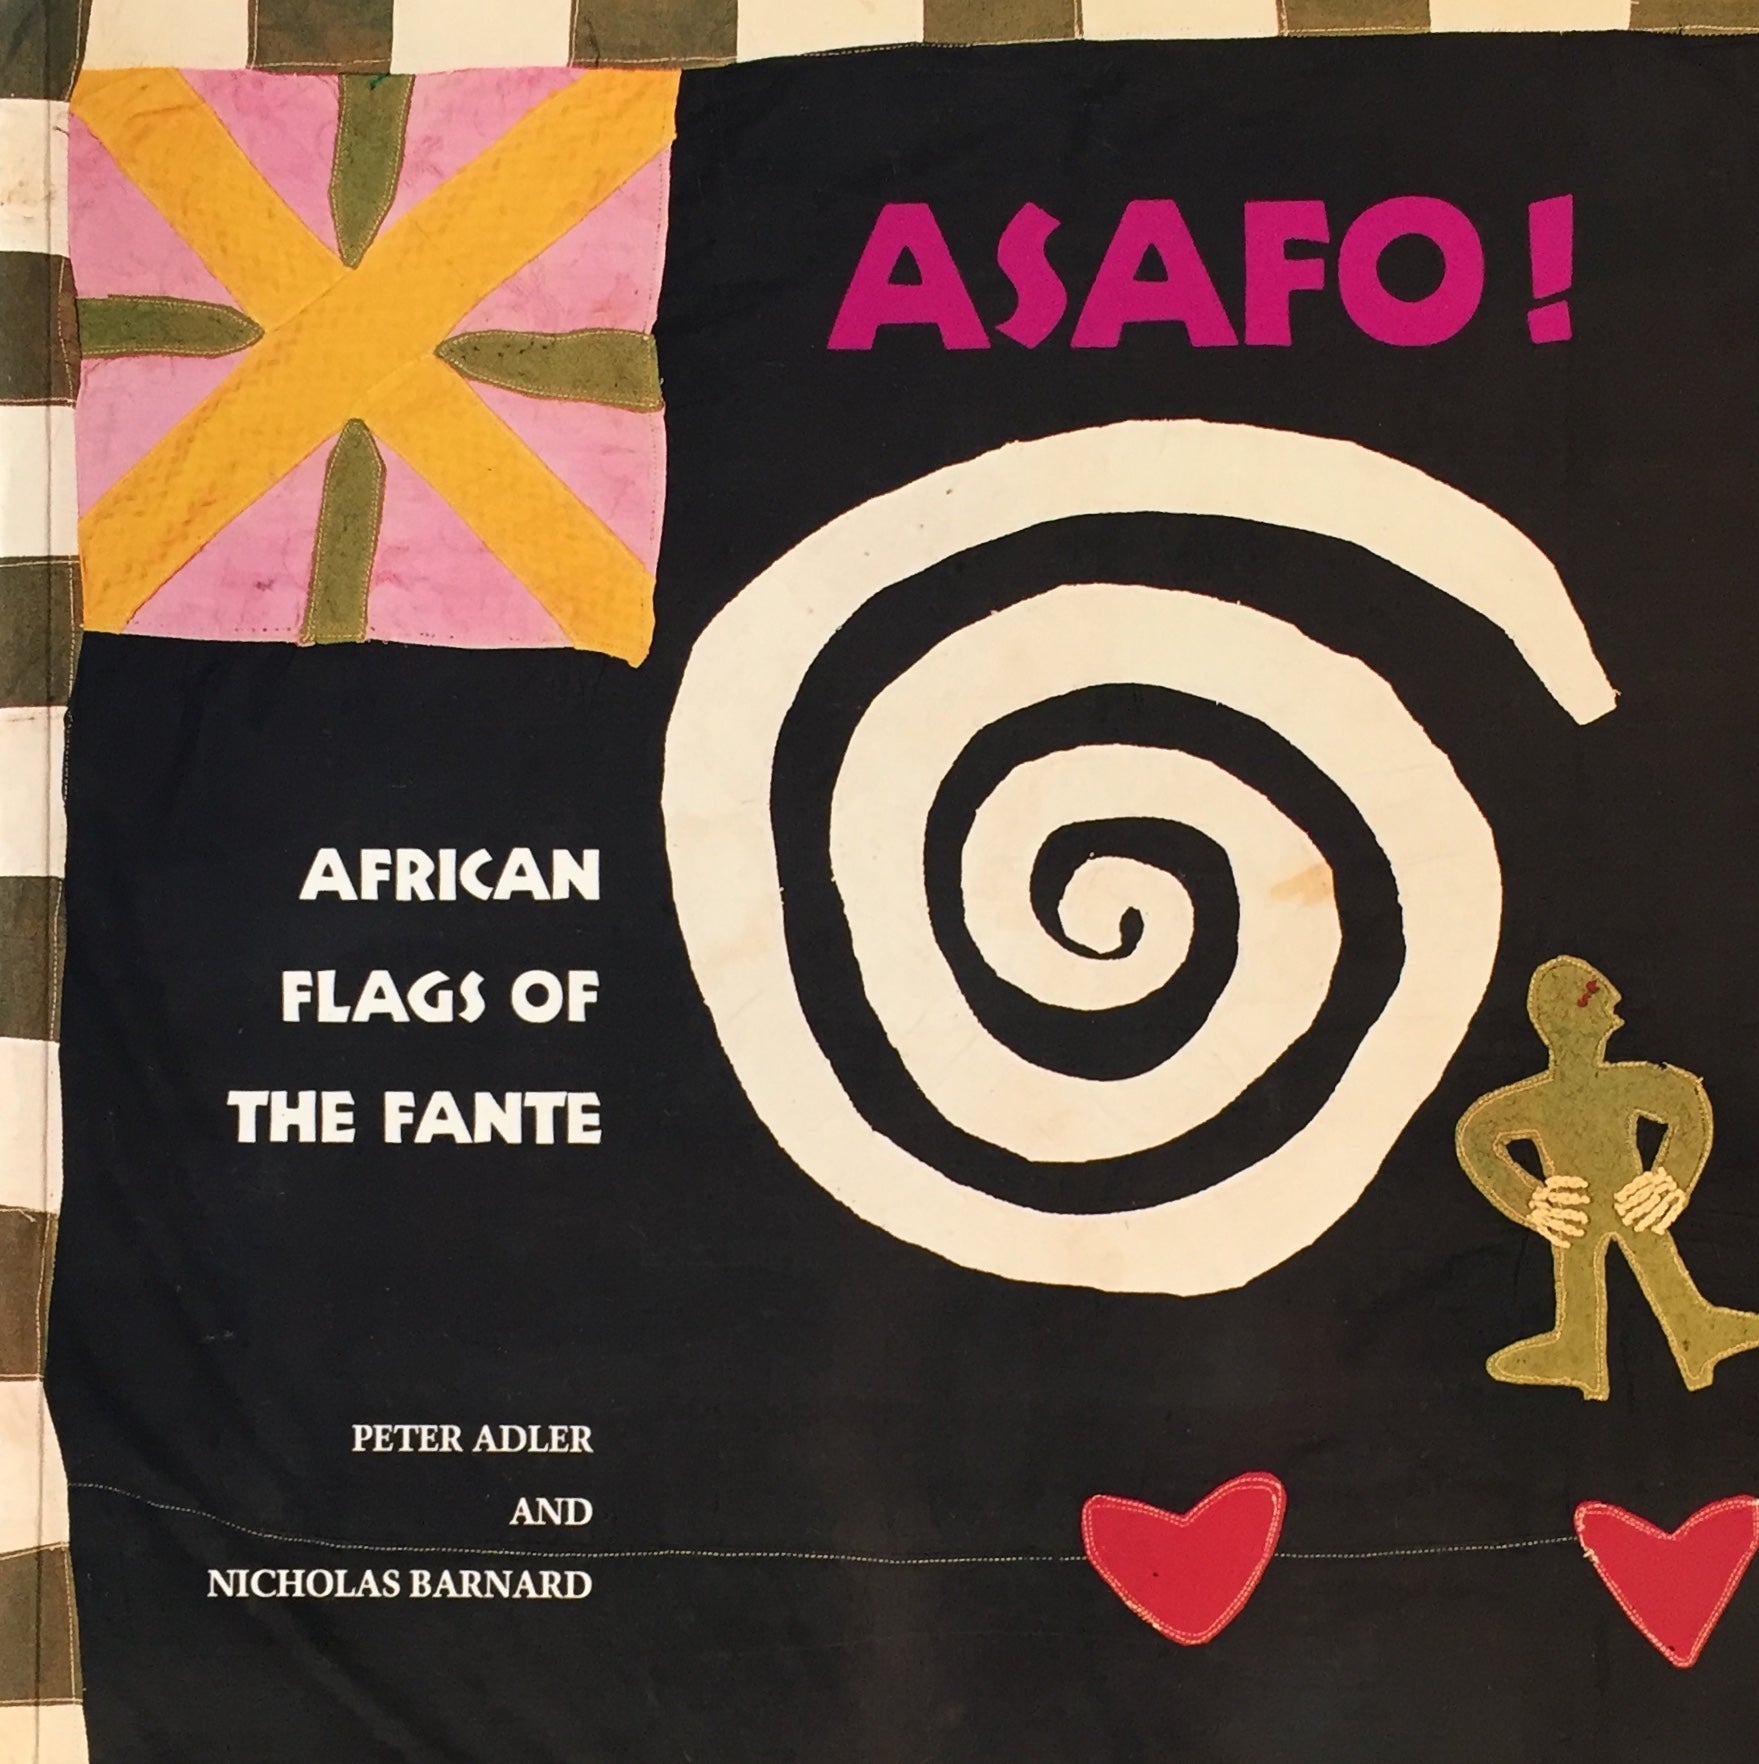 ASAFO!　AFRICAN FLAGS OF THE FANTE